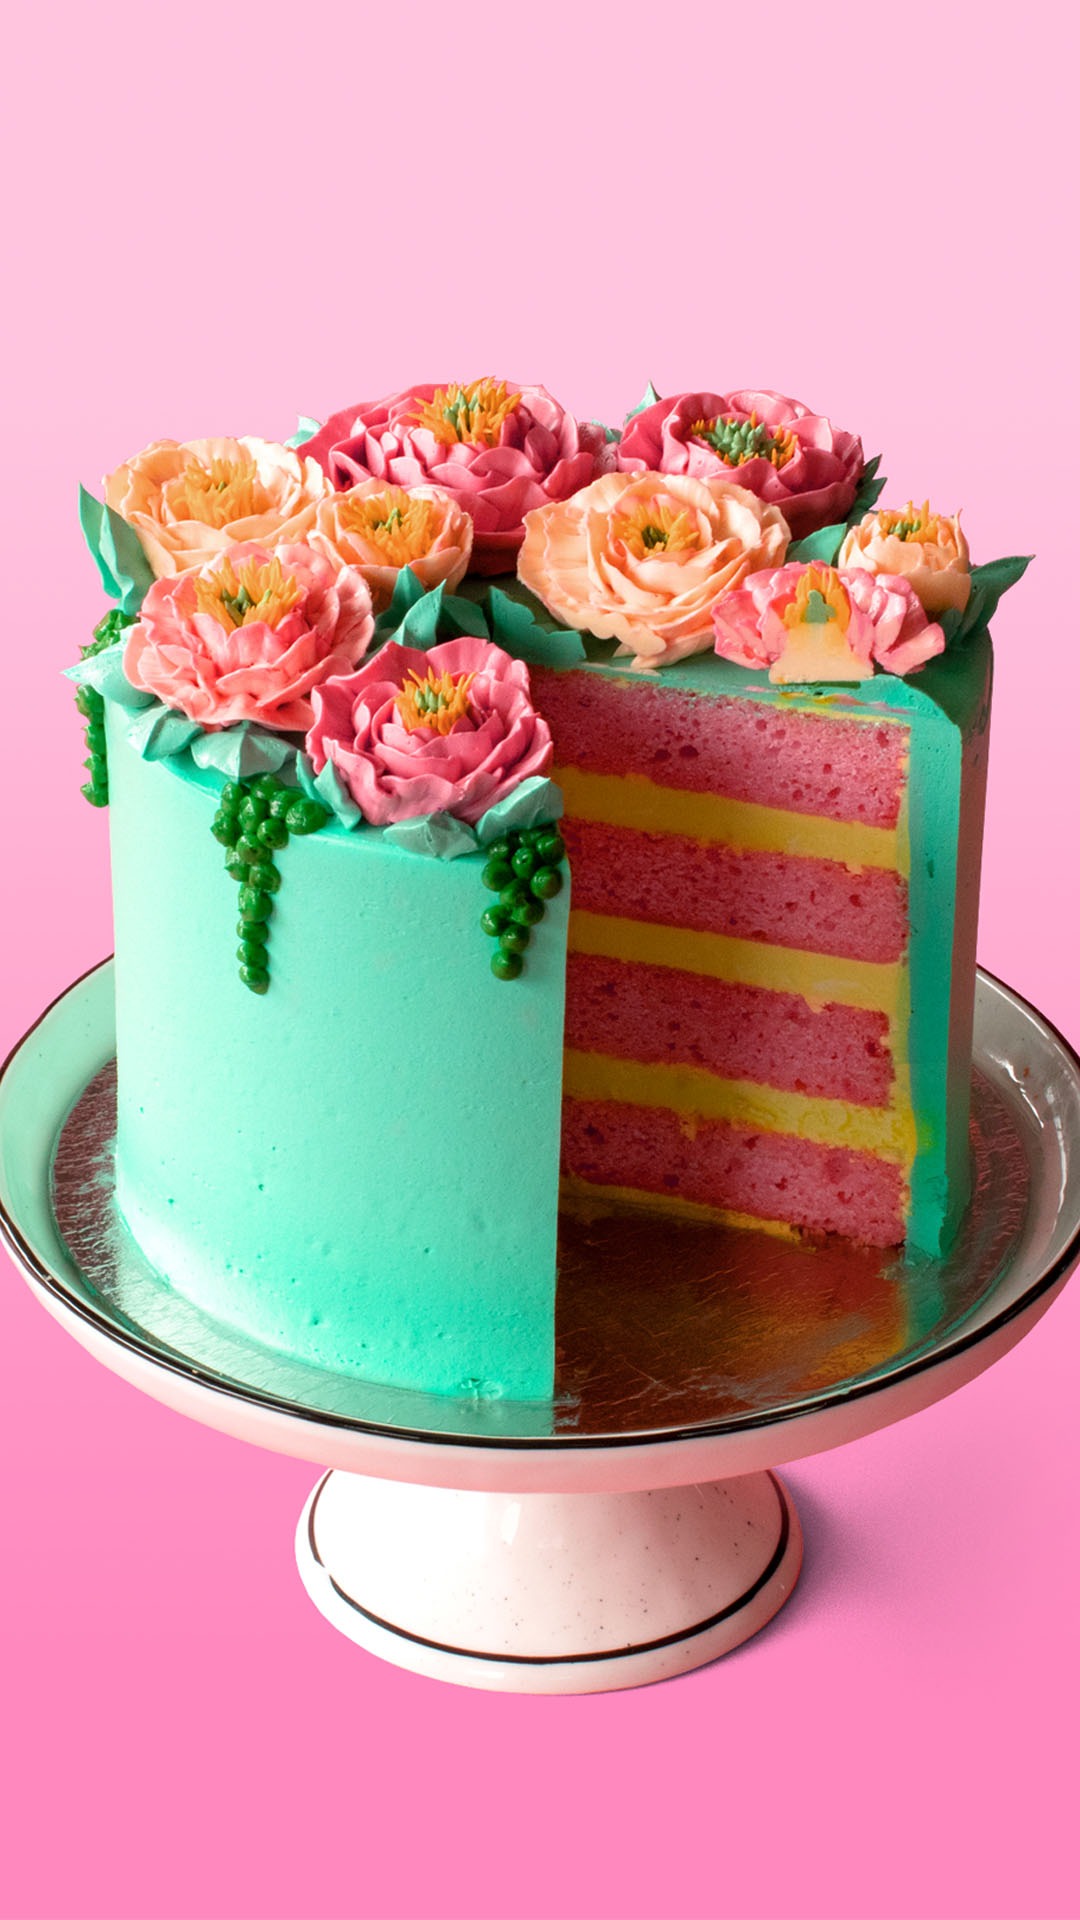 Are These The Most Beautiful Cakes In The World? | Lovika